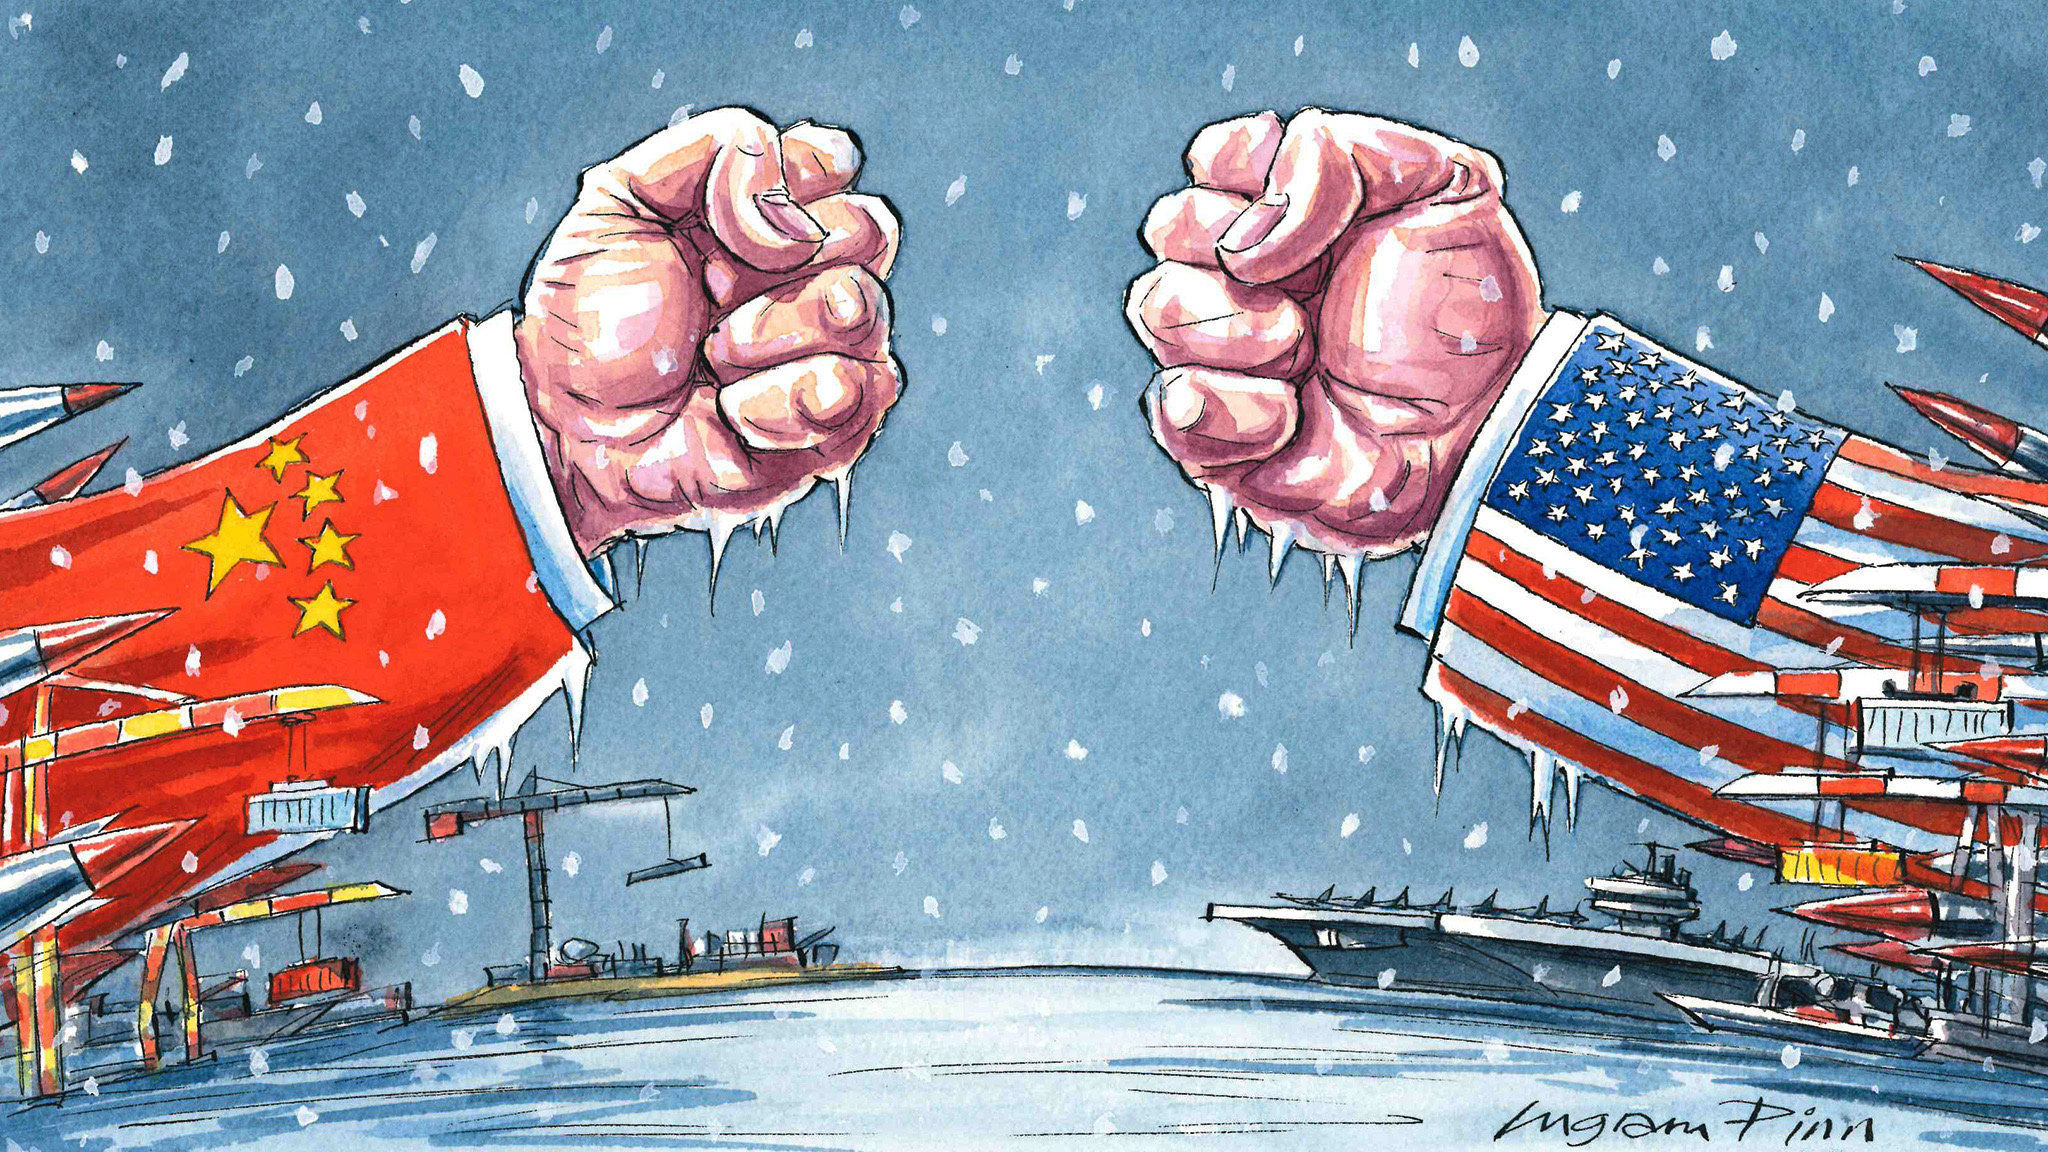 metaphor-and-metonymy-in-chinese-and-american-political-cartoons